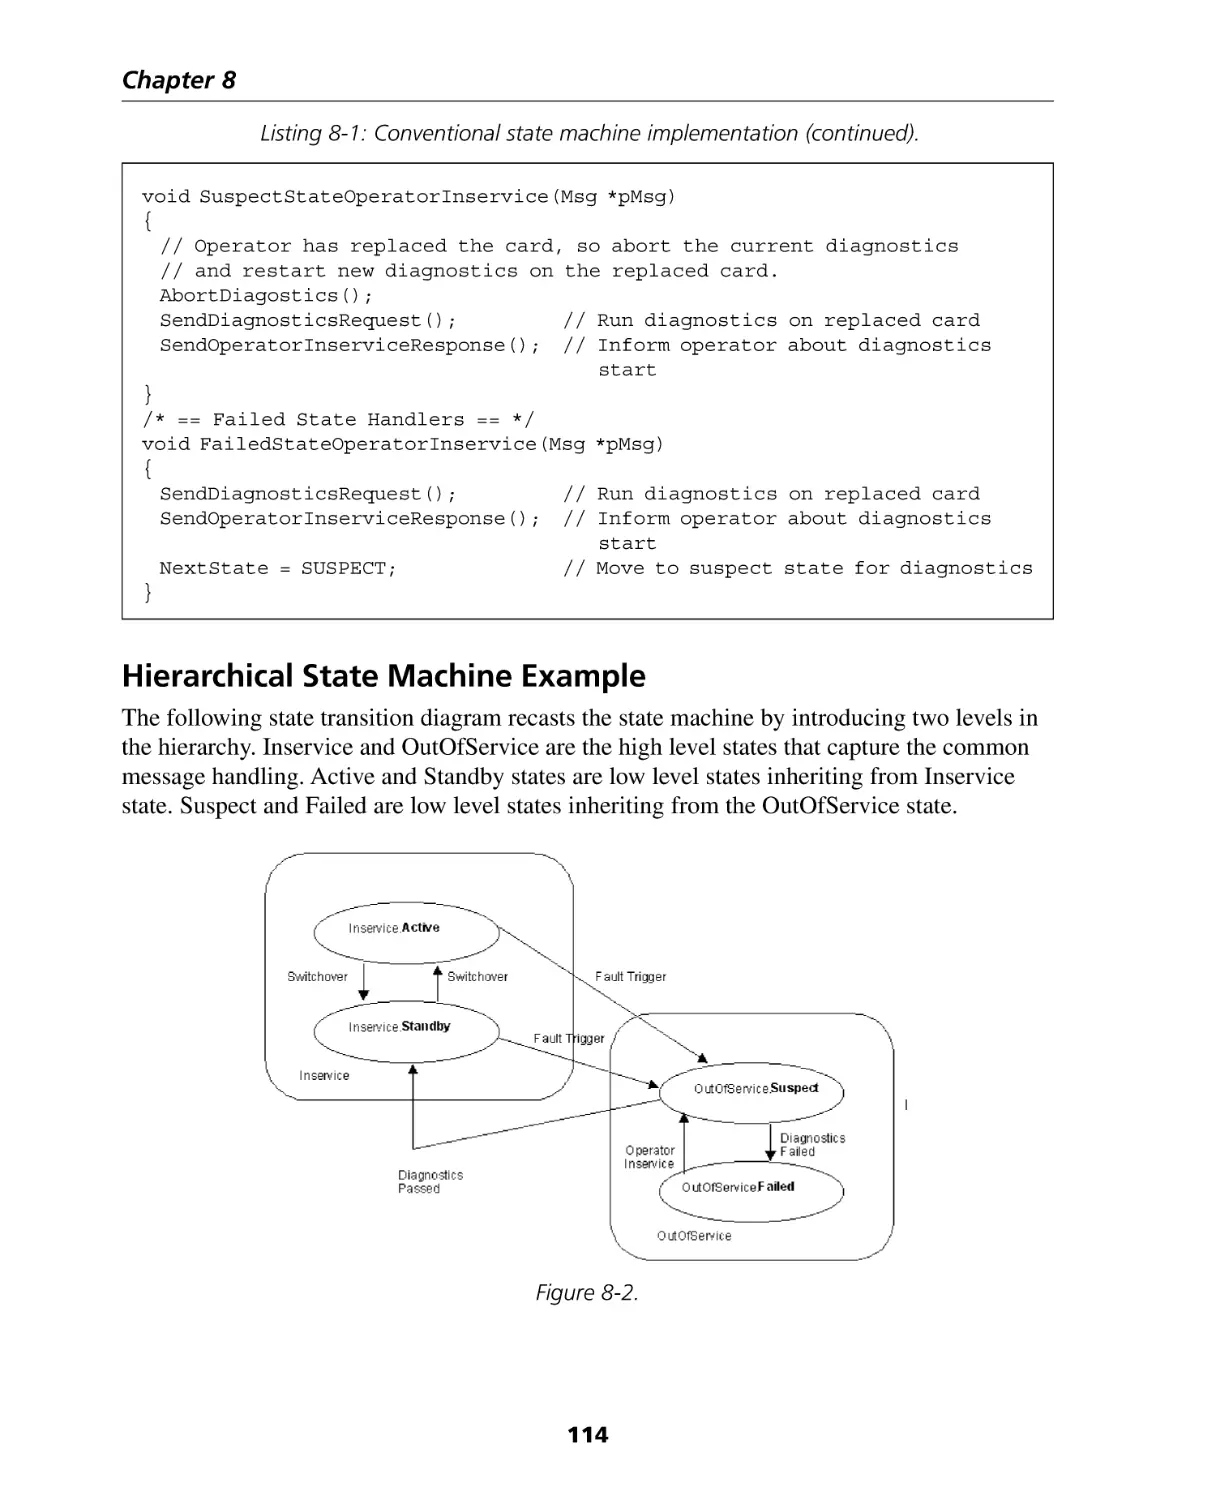 Hierarchical State Machine Example